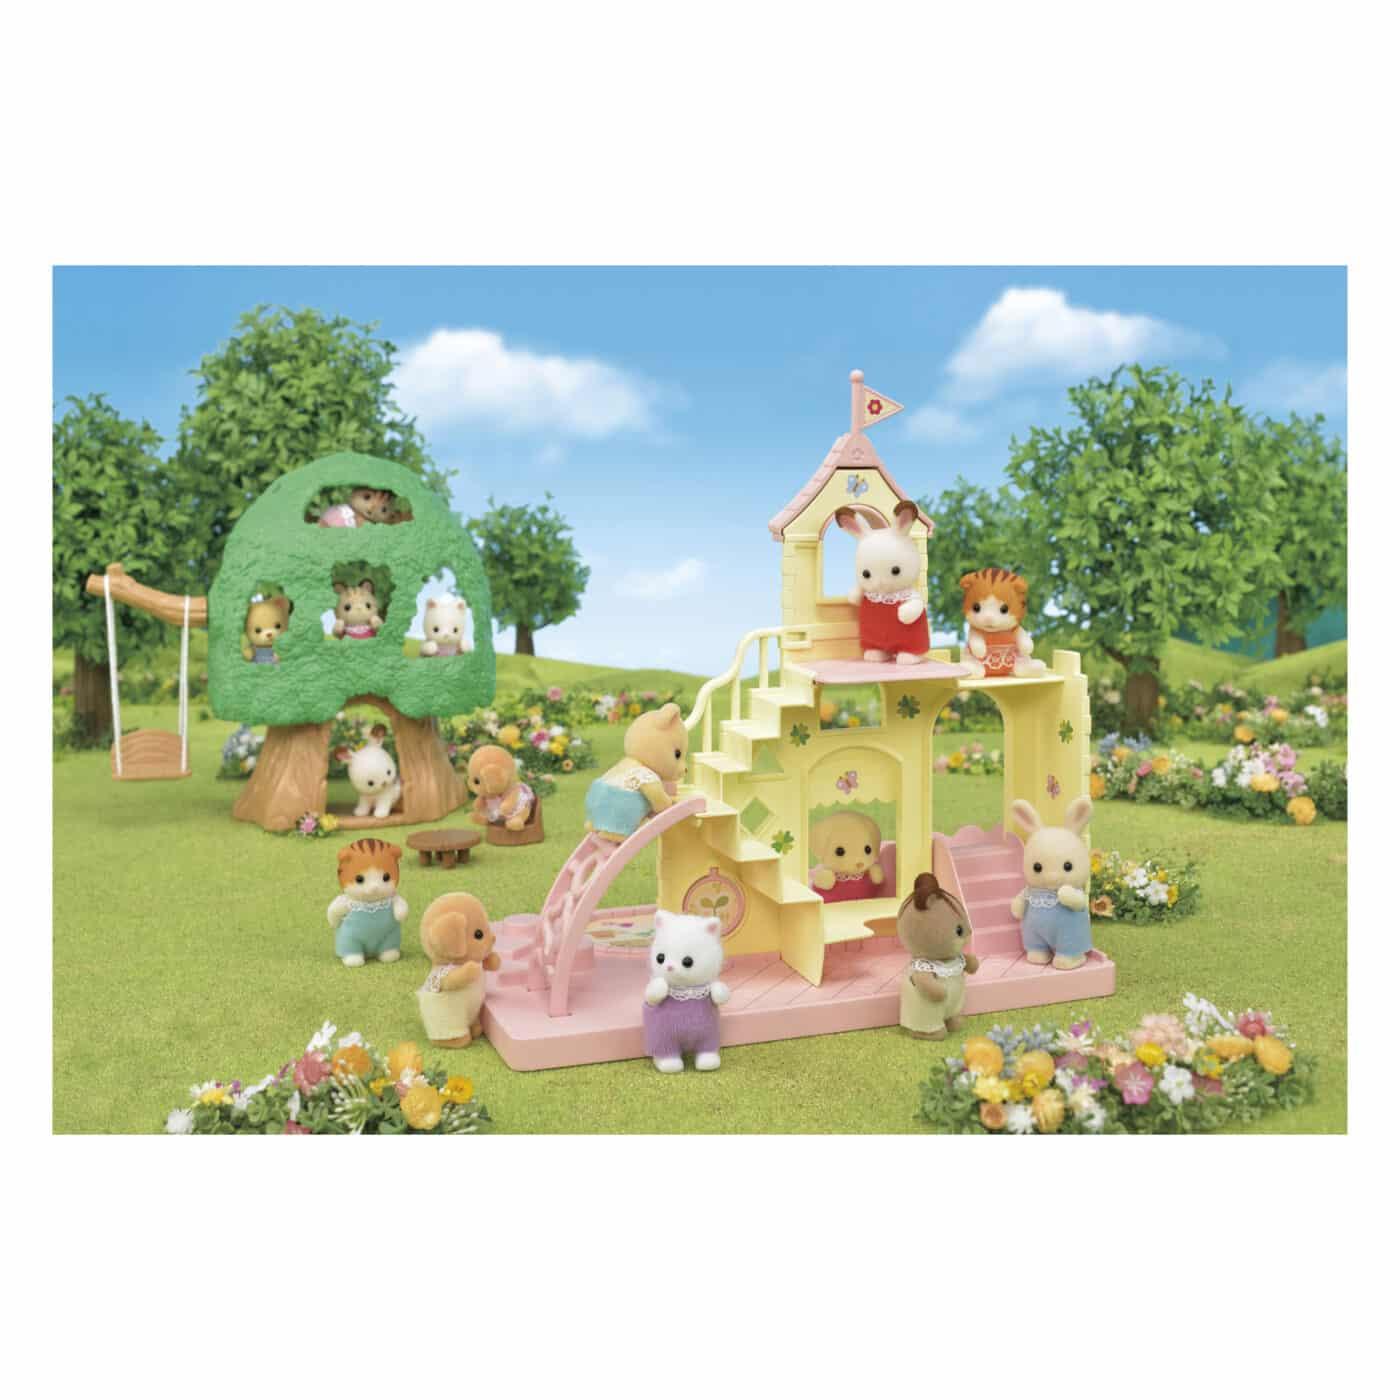 Sylvanian Families - Baby Castle Playground 5319